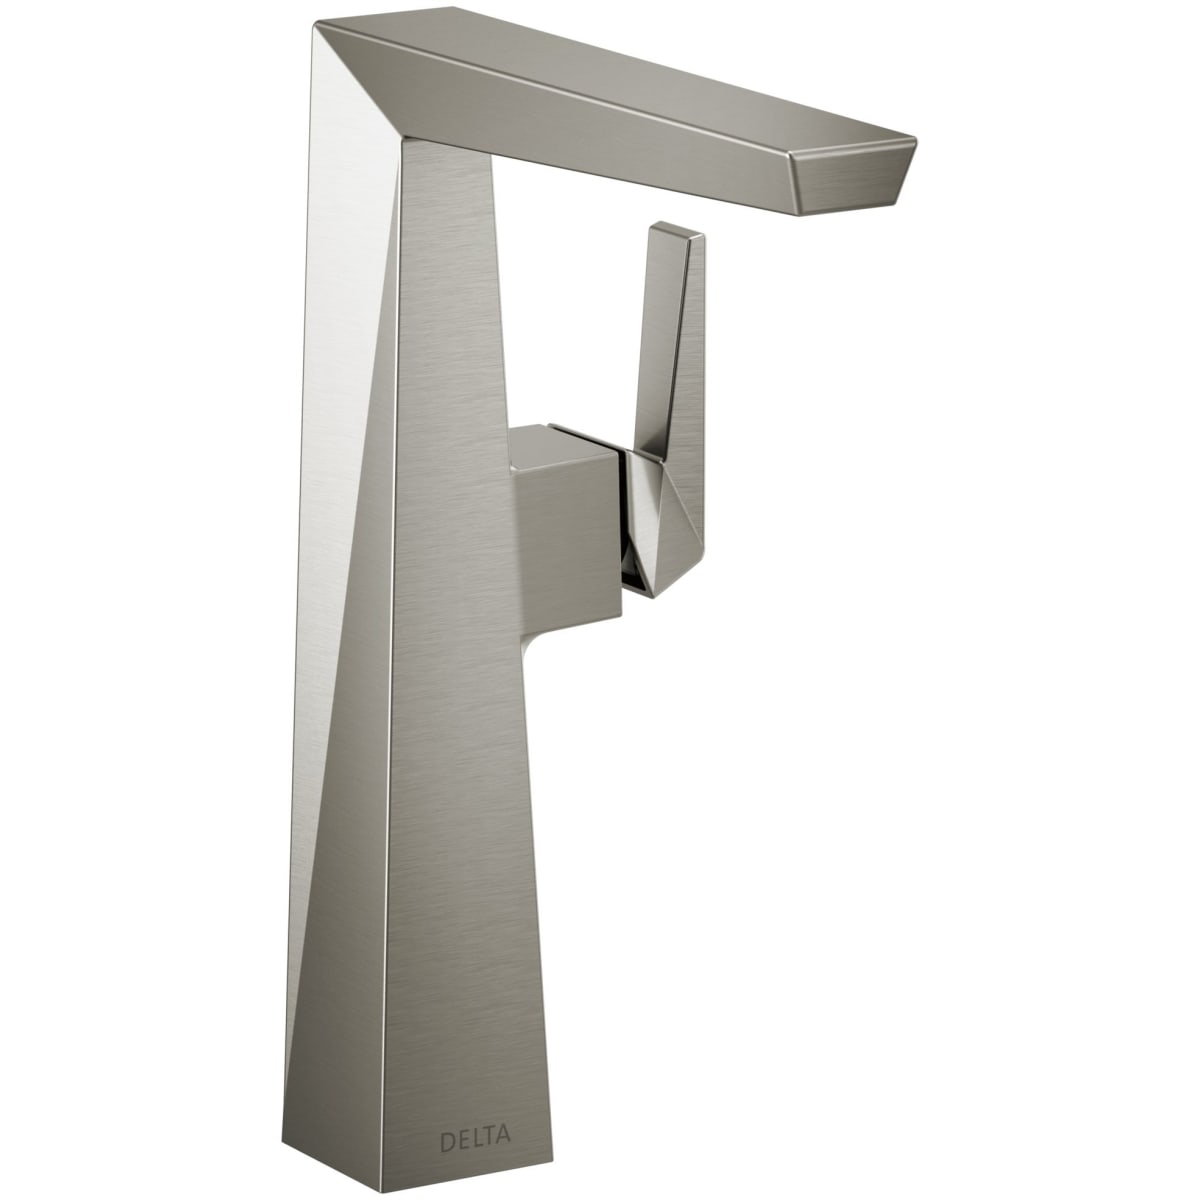 Trillian 1-Lever Handle Vessel Faucet in Stainless